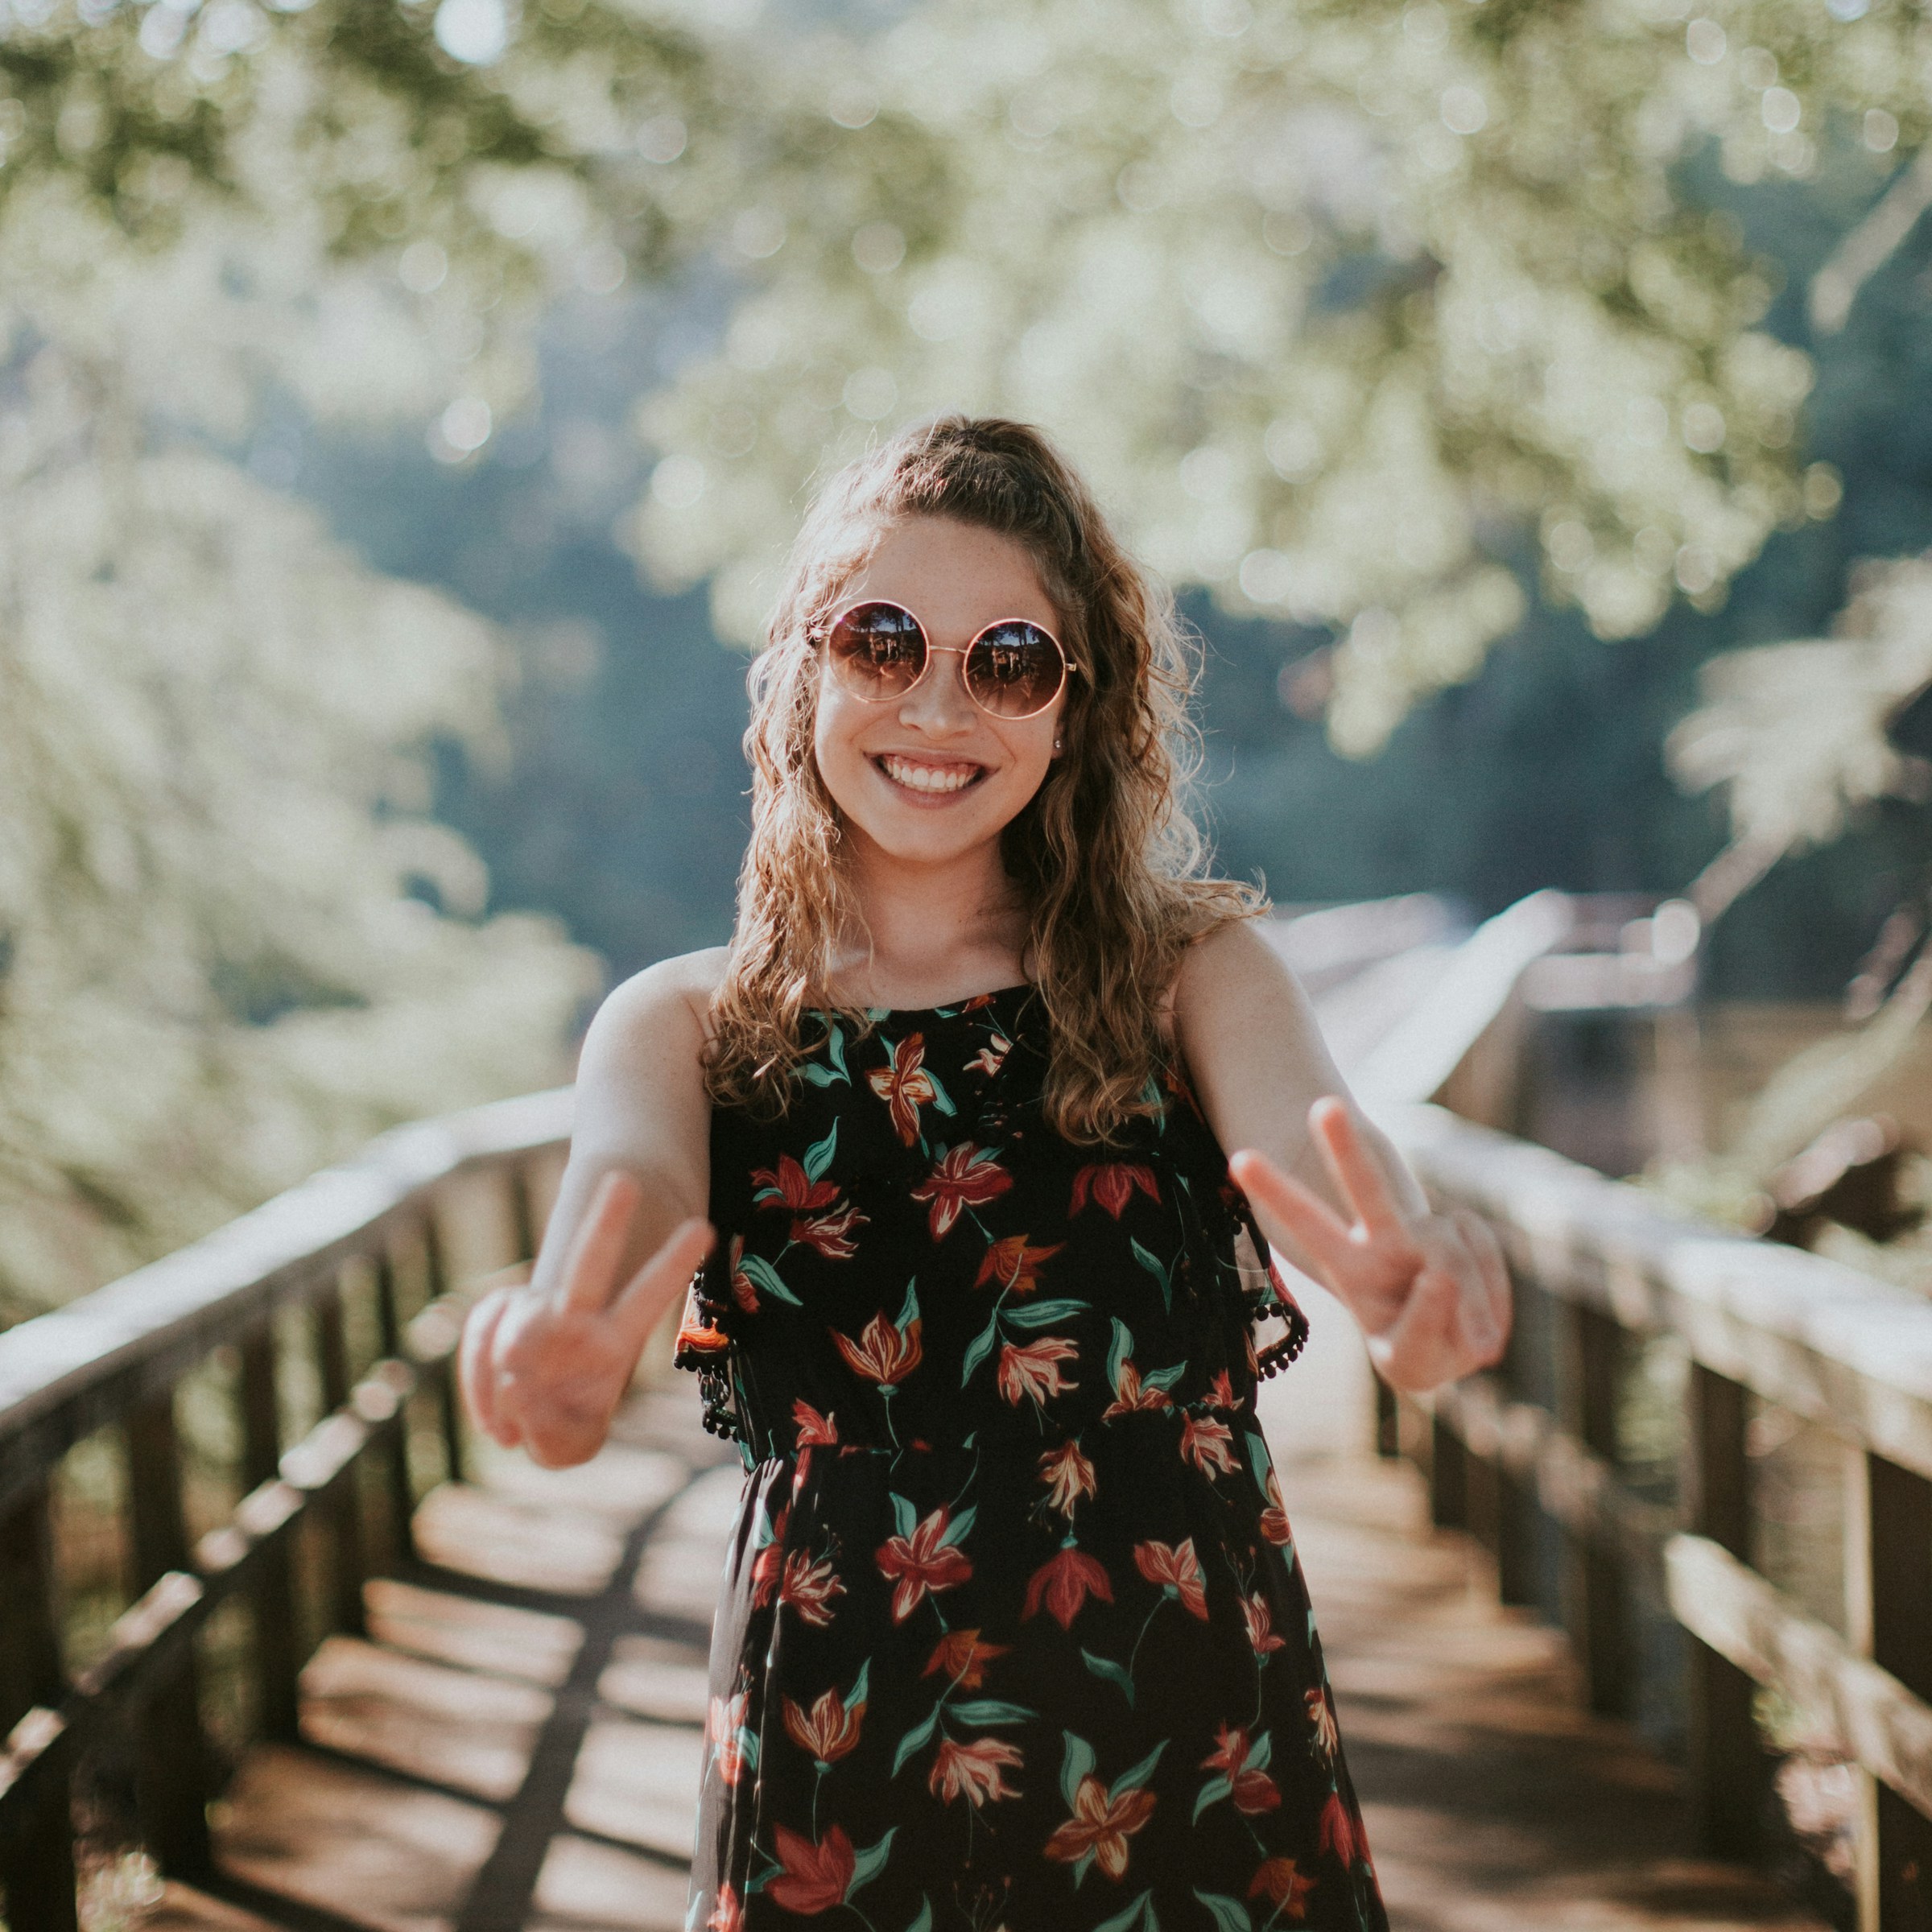 A woman smiling while making the victory sign with her hands | Source: Pexels